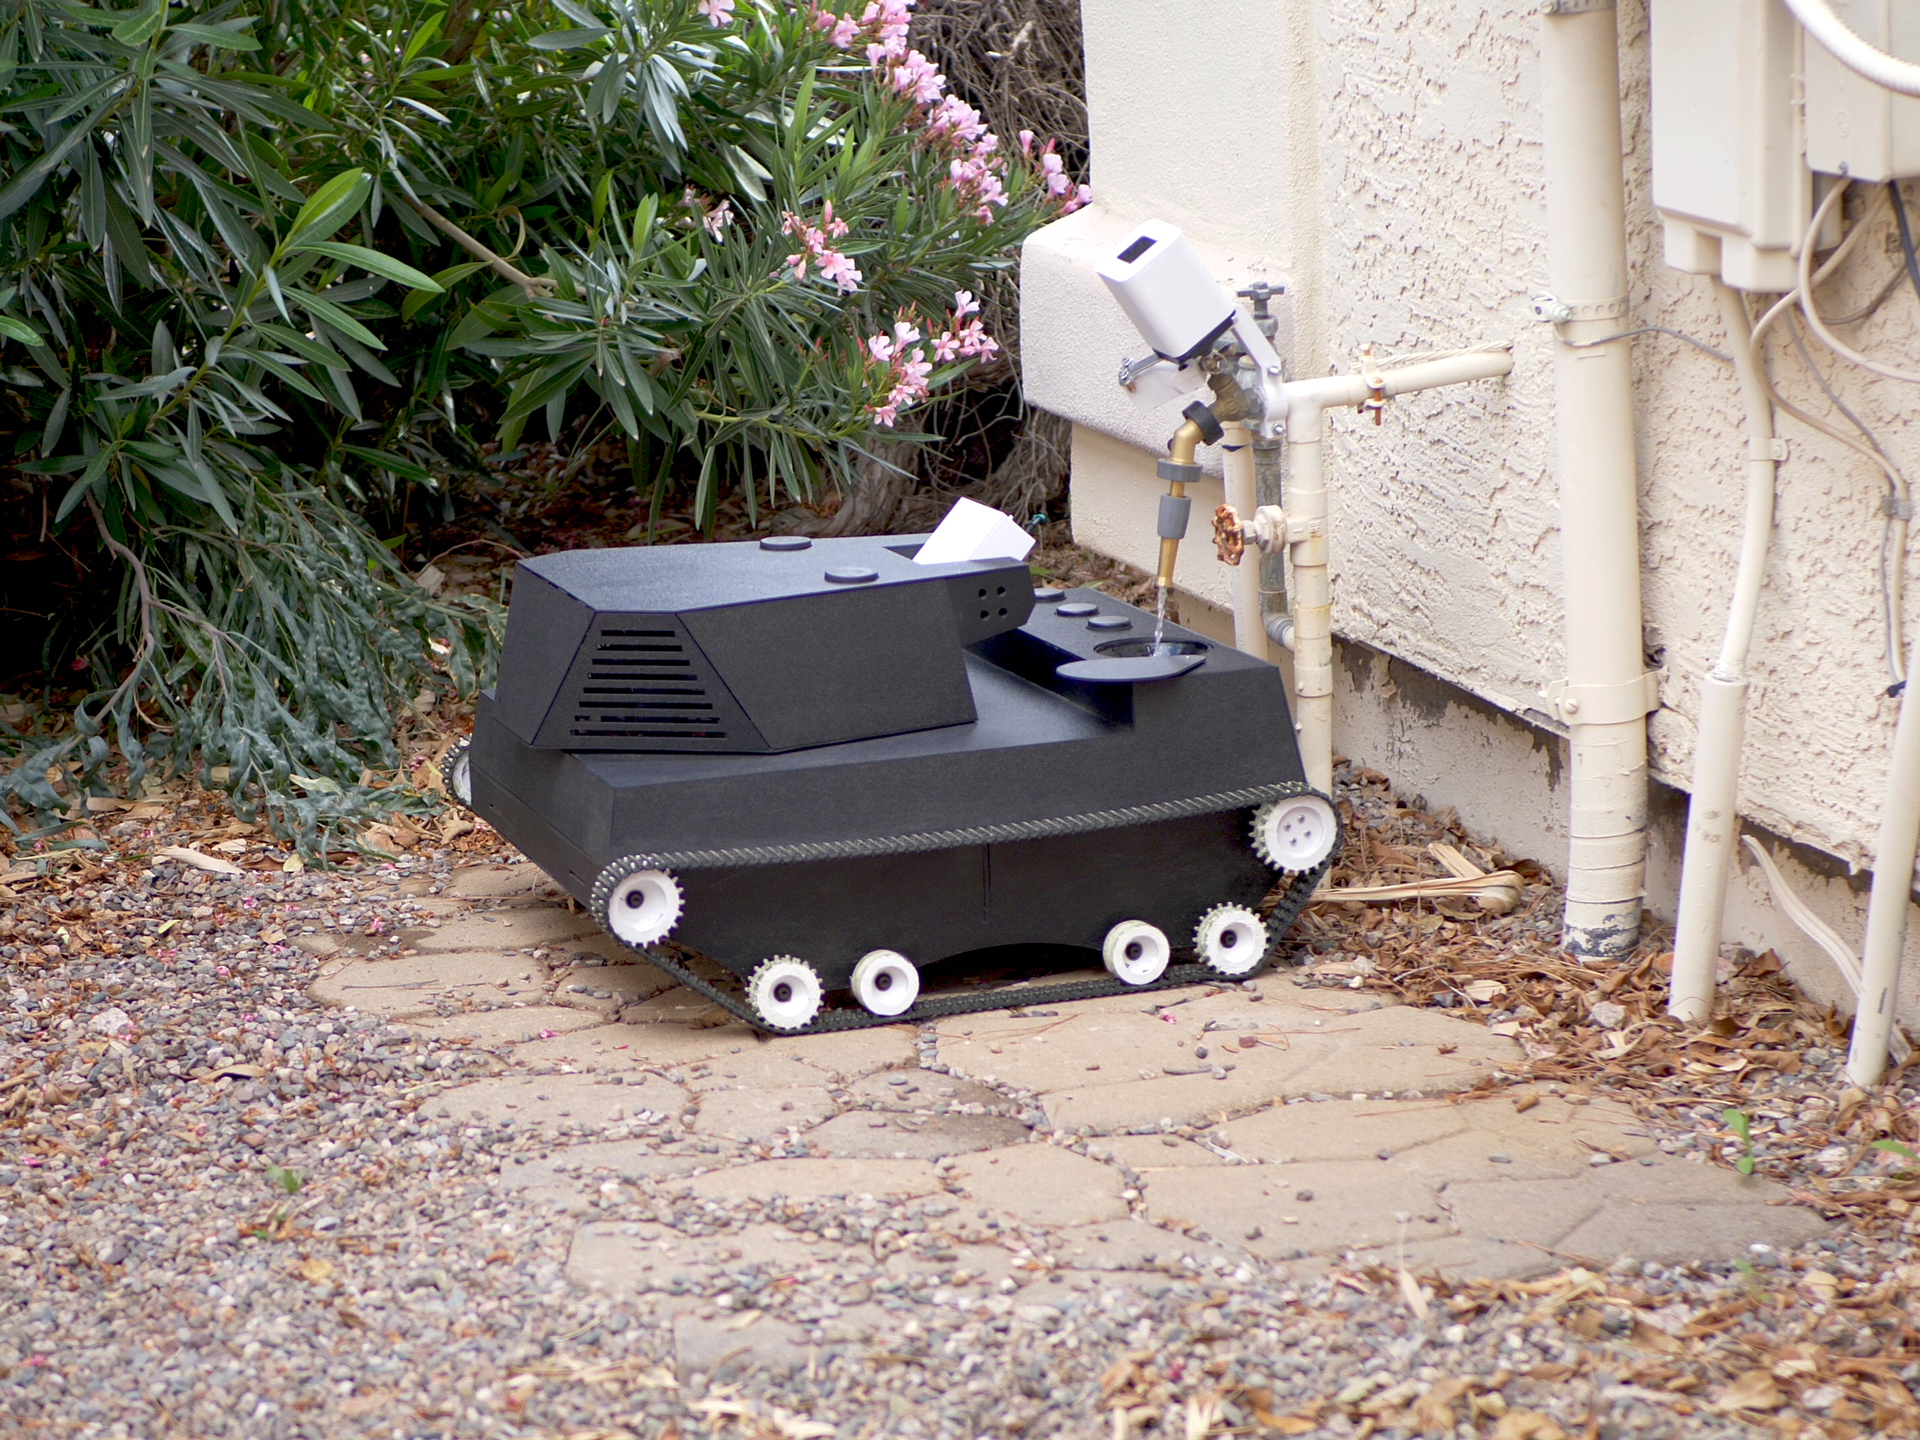 Yardroid - A mix of terminator & robotic lawn mower